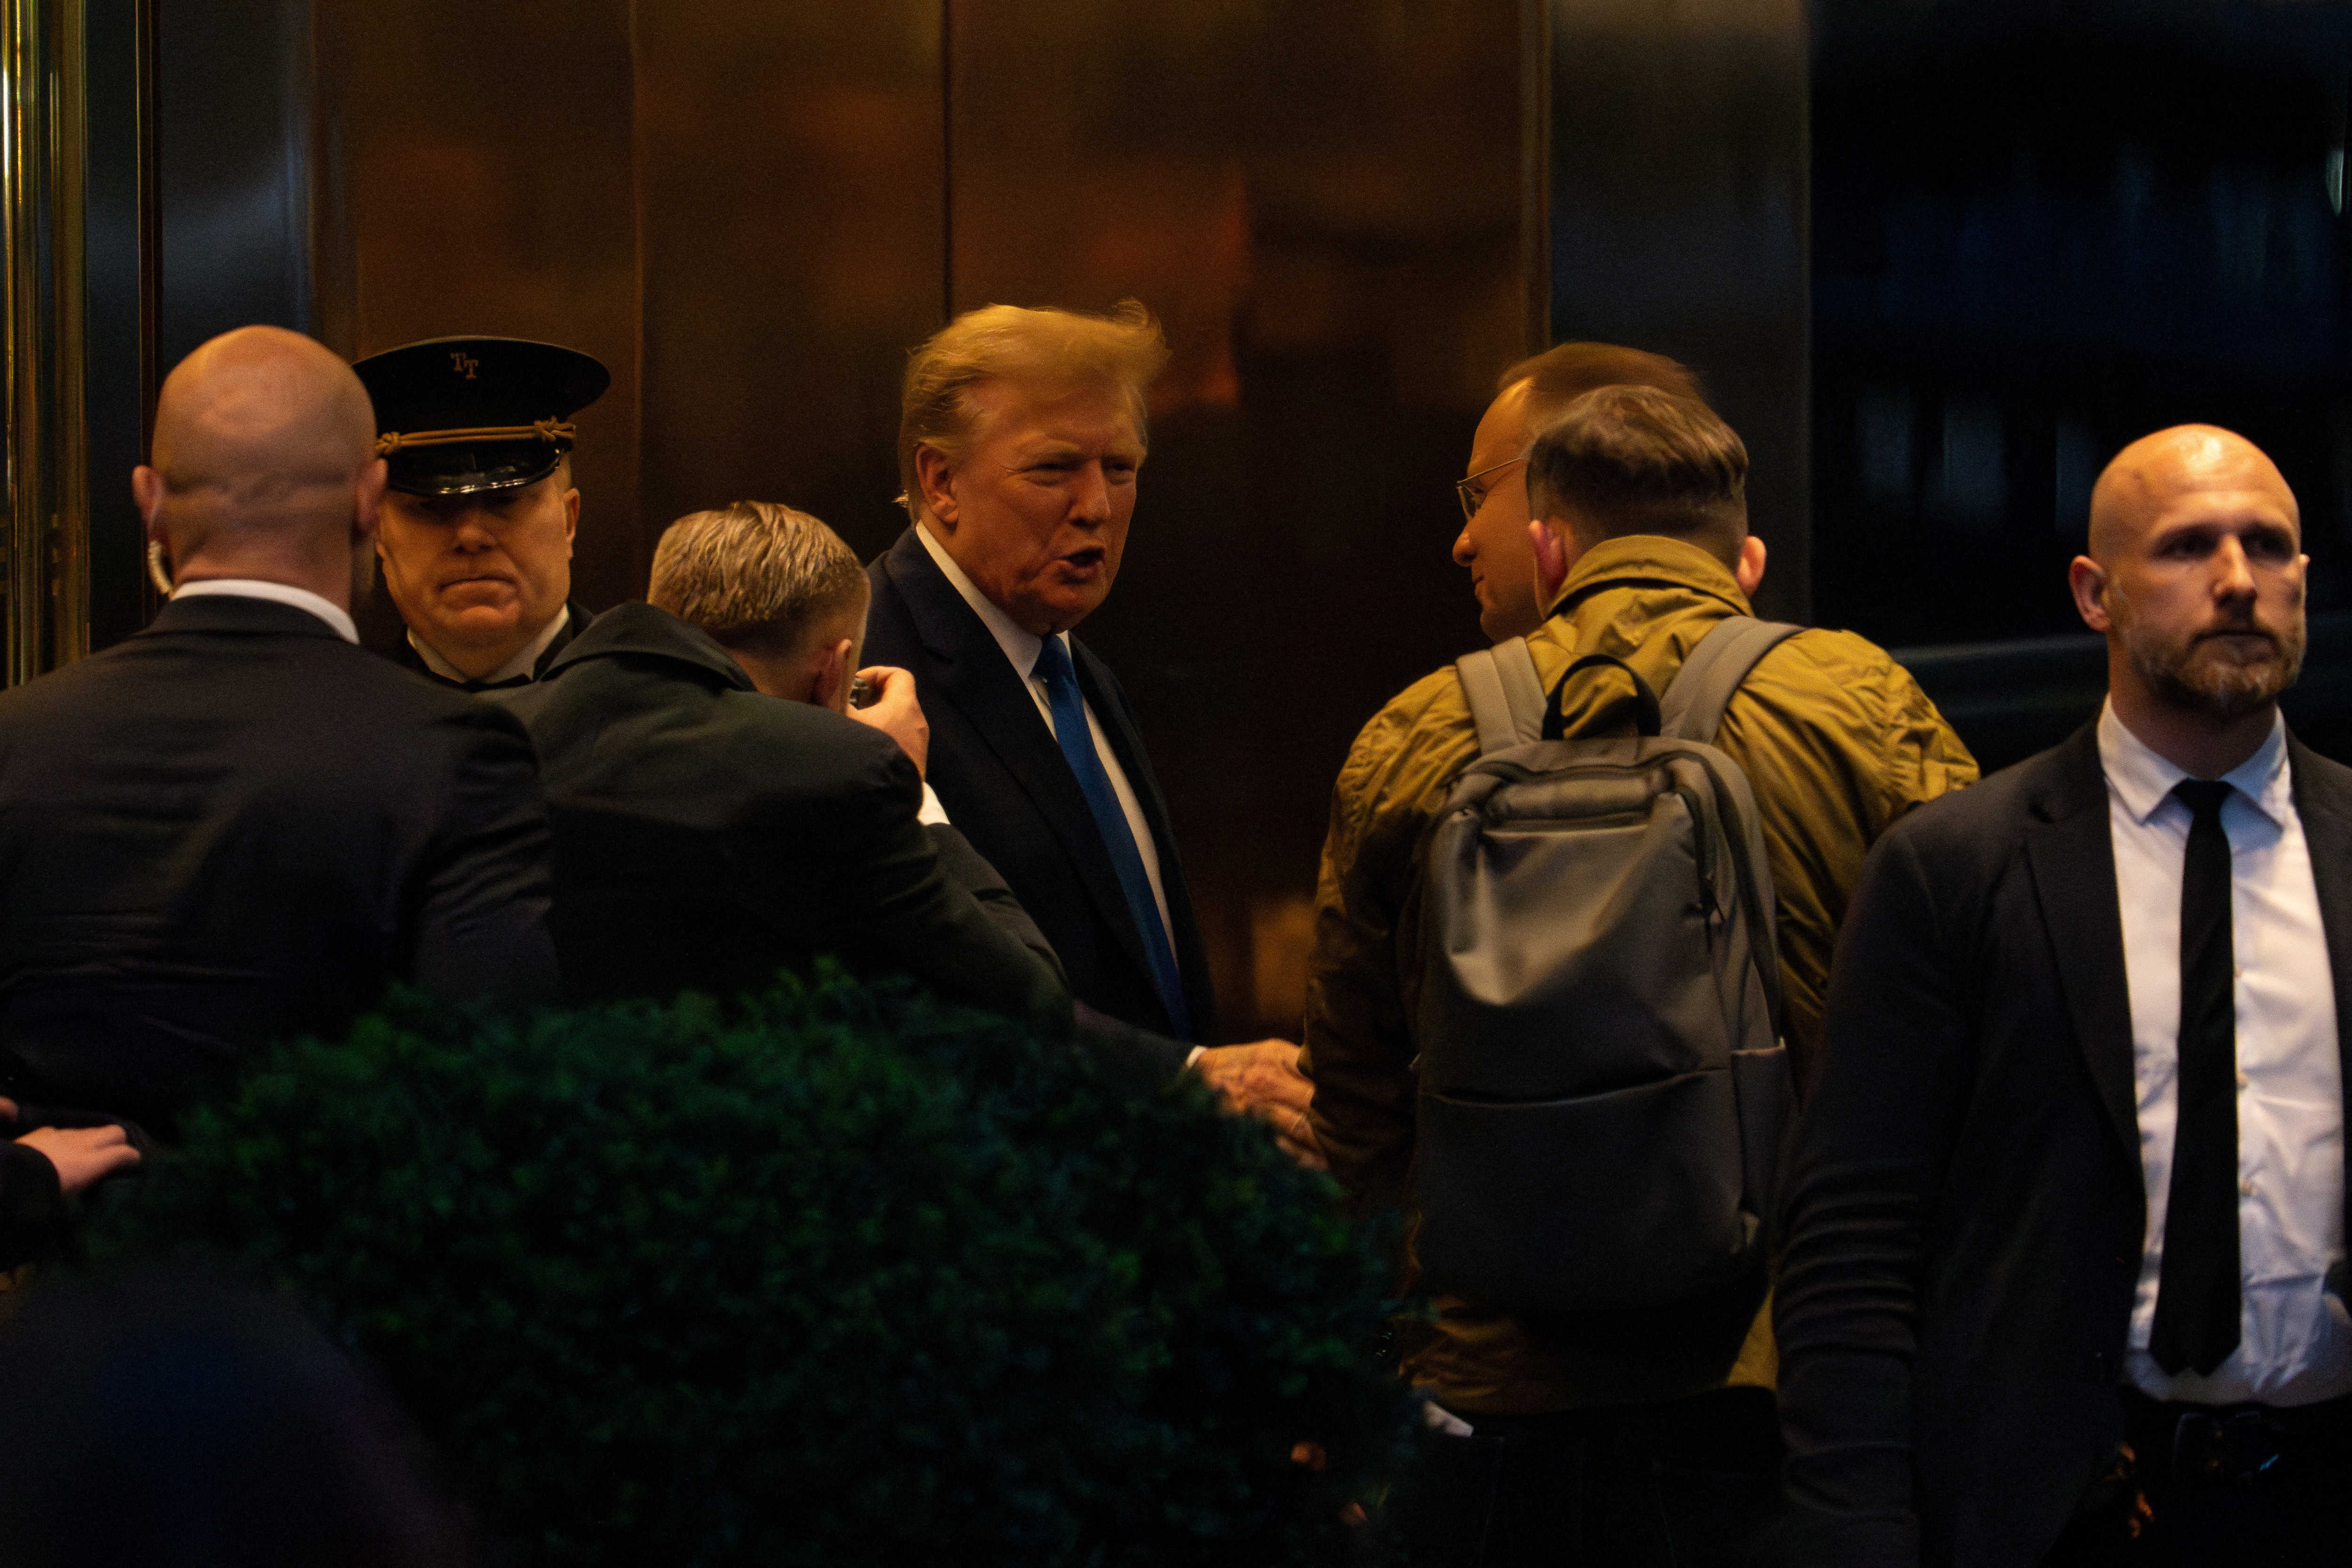 Republican presidential candidate and former U.S. President Donald Trump greets Polish President Andrzej Duda at Trump Tower in New York